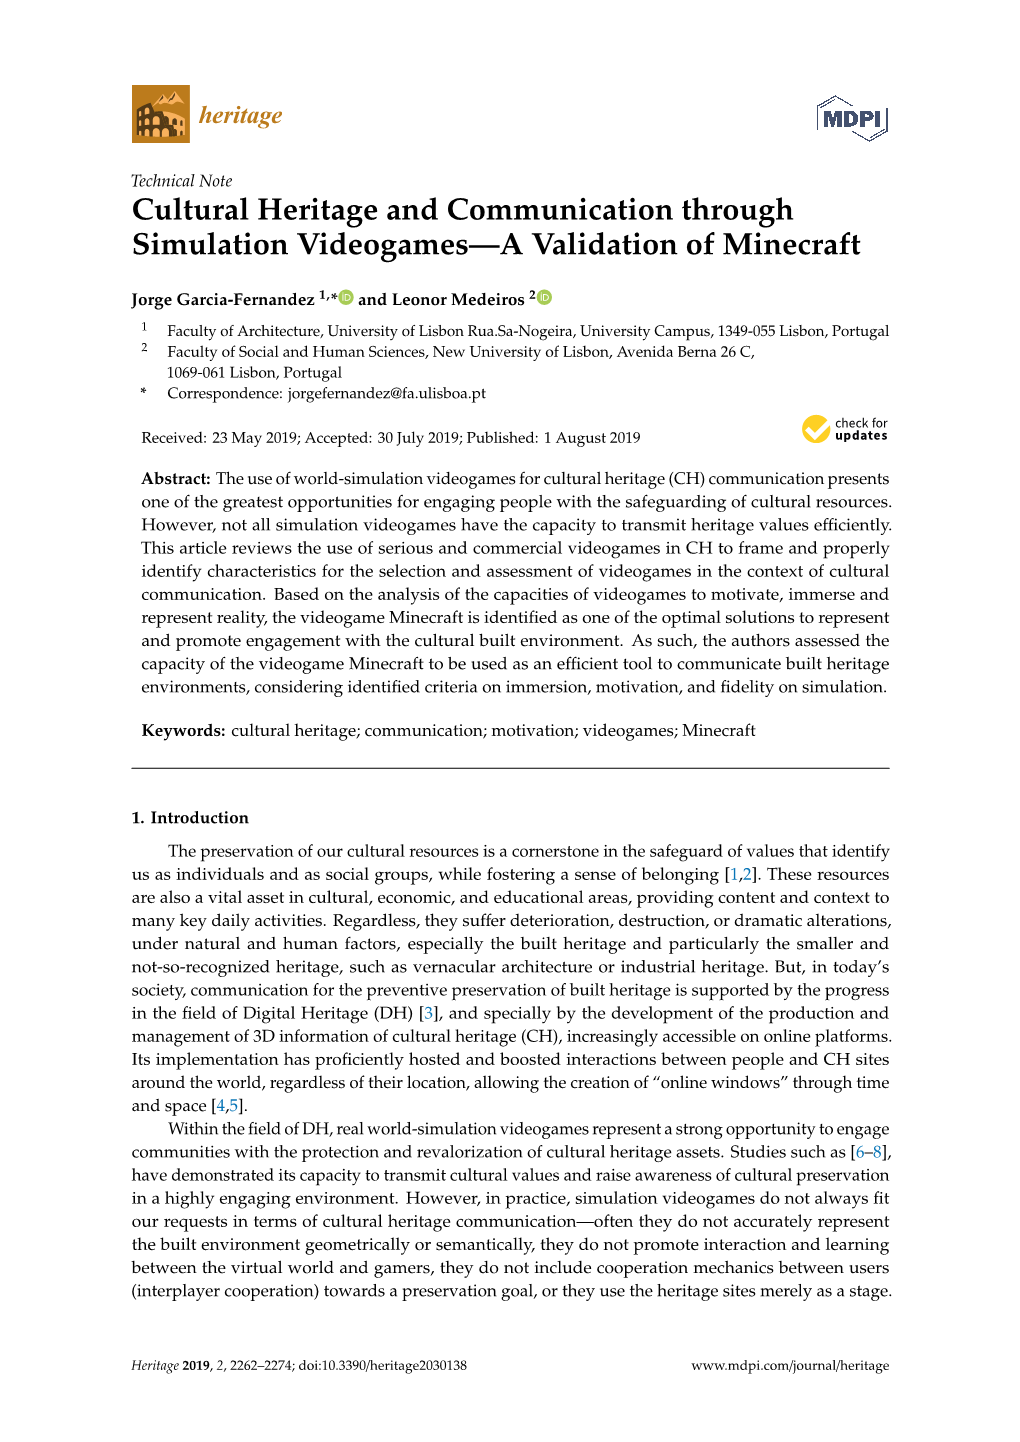 Cultural Heritage and Communication Through Simulation Videogames—A Validation of Minecraft